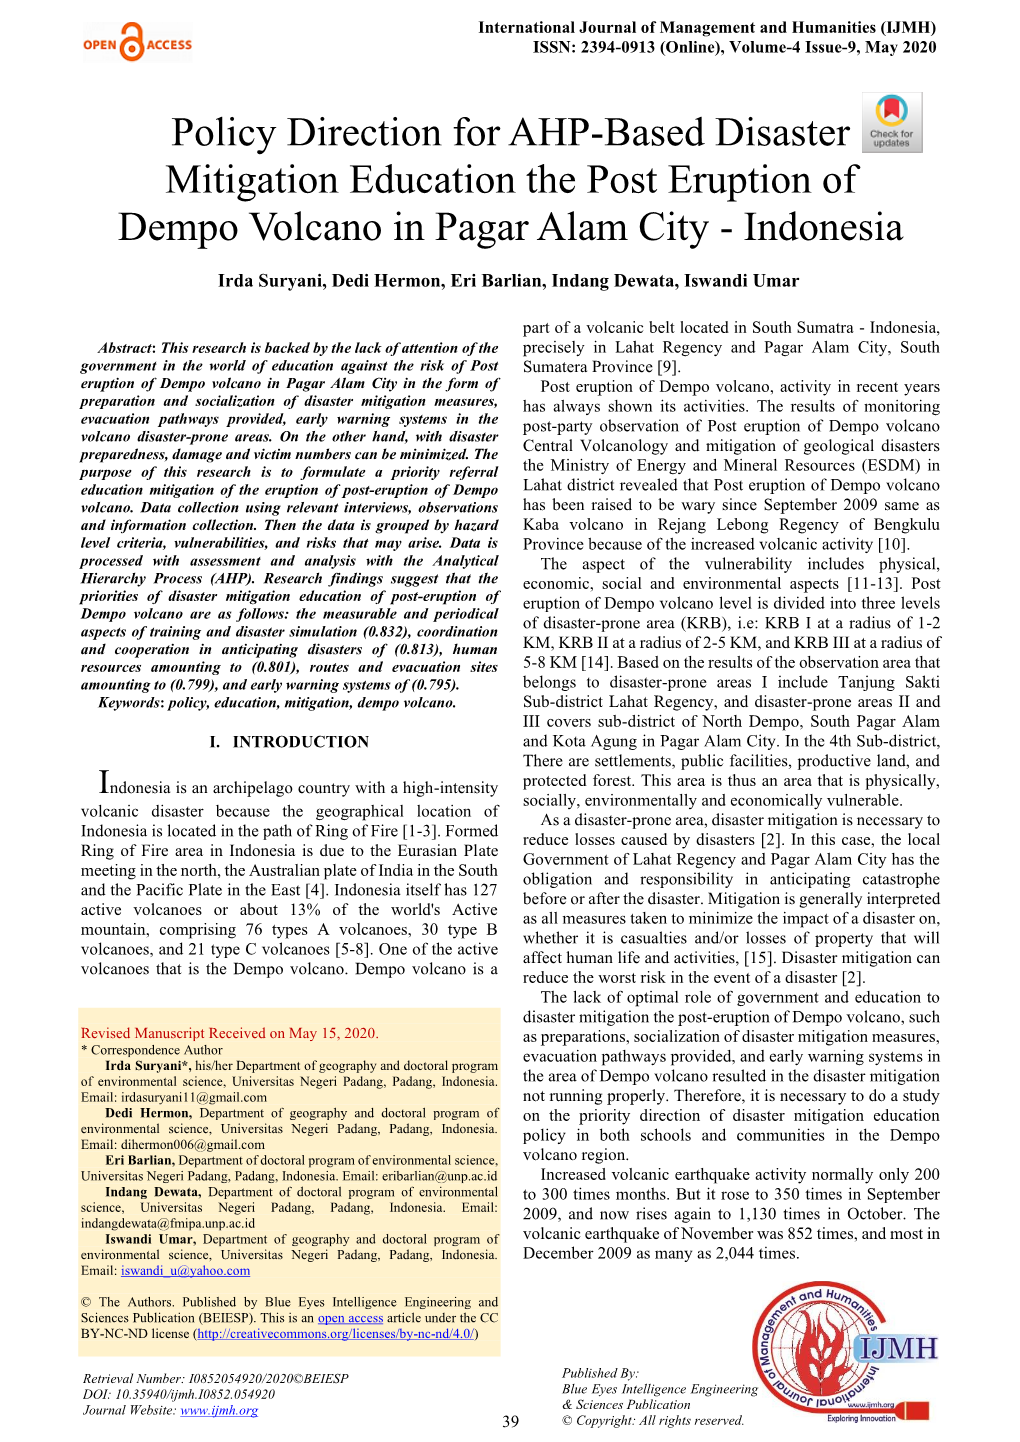 Policy Direction for AHP-Based Disaster Mitigation Education the Post Eruption of Dempo Volcano in Pagar Alam City - Indonesia